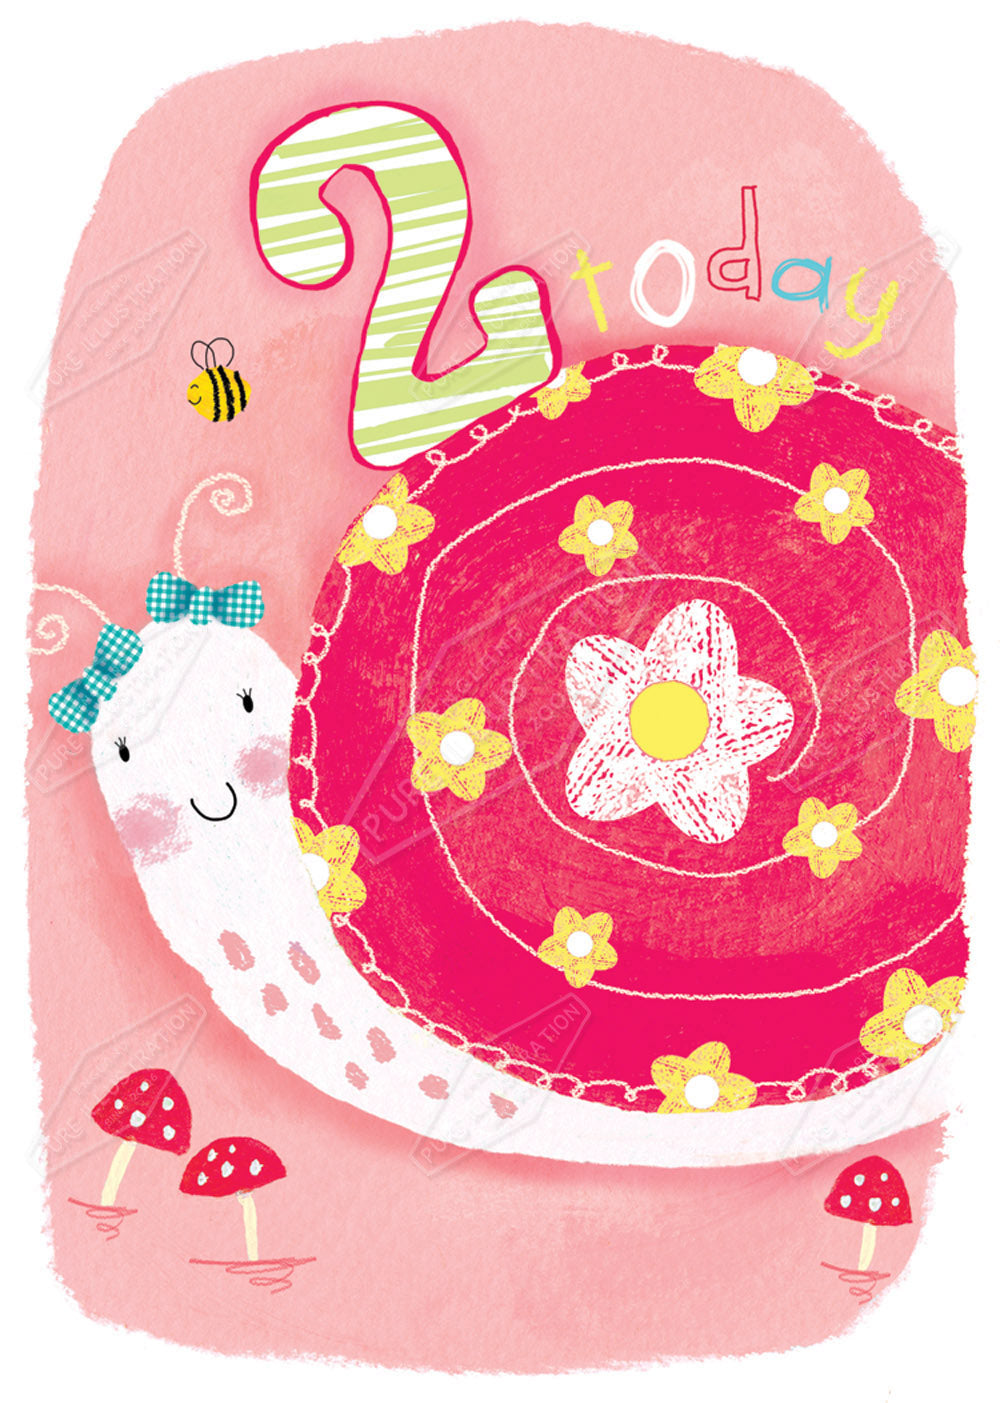 Birthday Snail Age Card Greeting Card Design by Cory Reid for Pure art Licensing Agency & Surface Design Studio